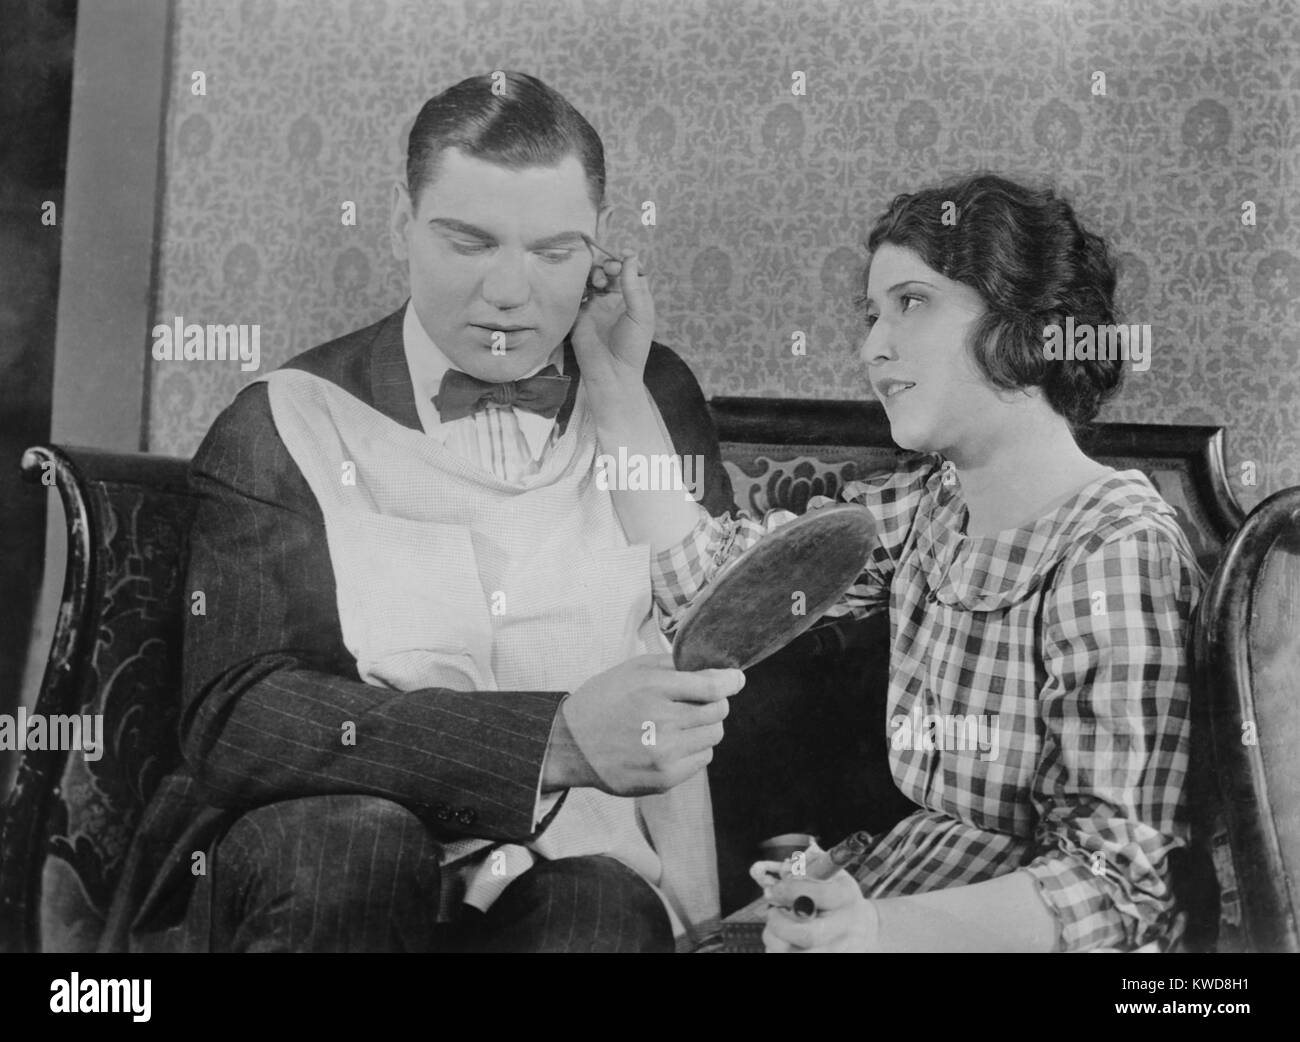 Former heavyweight champion boxer Jack Dempsey has make up applied. After boxing he starred in half a dozen silent and talking films. Ca. 1920. (BSLOC 2015 17 77) Stock Photo